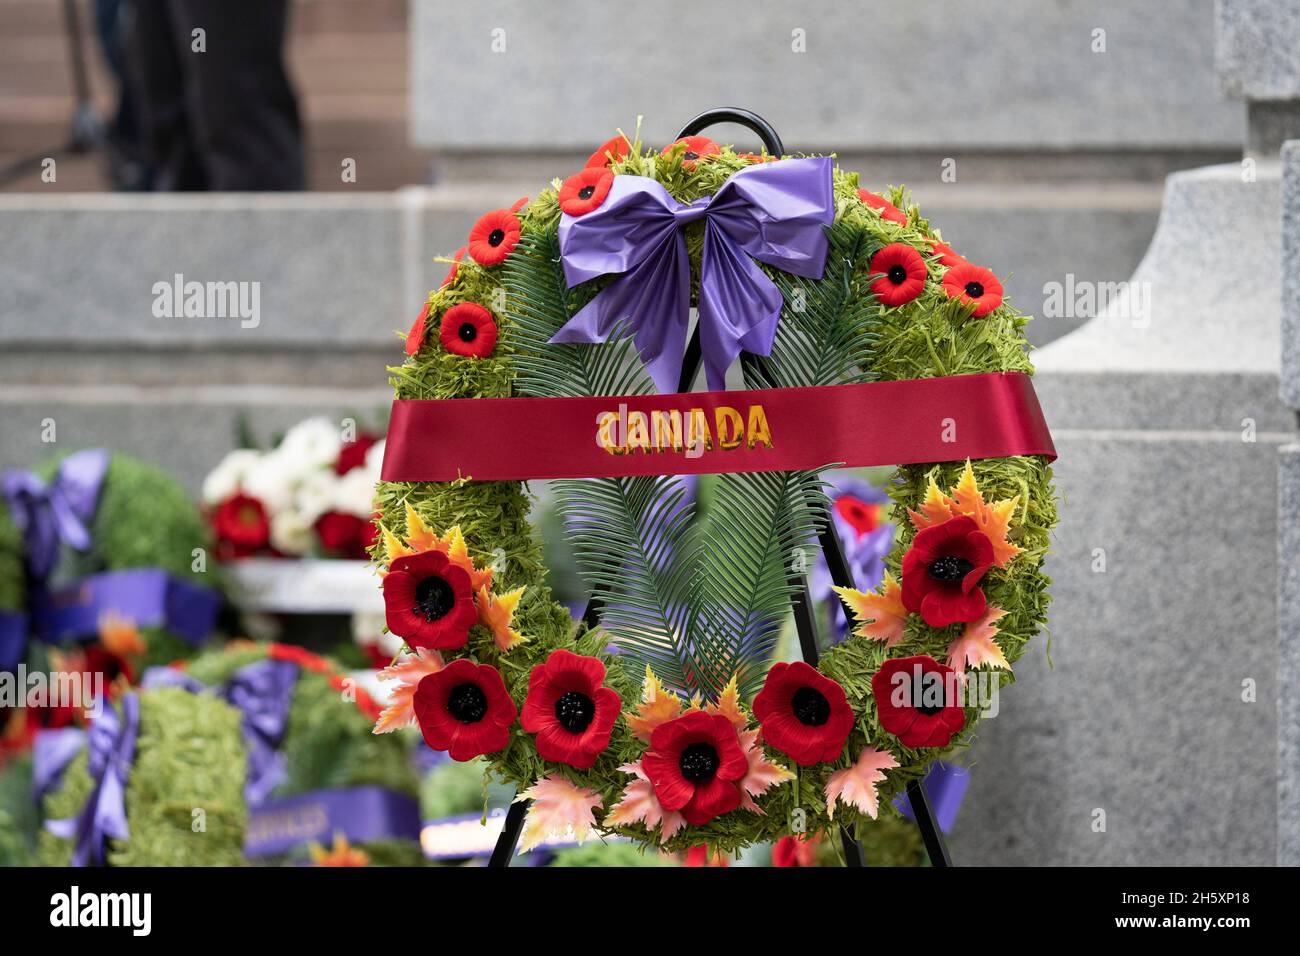 Remembrance Day Canada, Wreath, Poppies Stock Photo